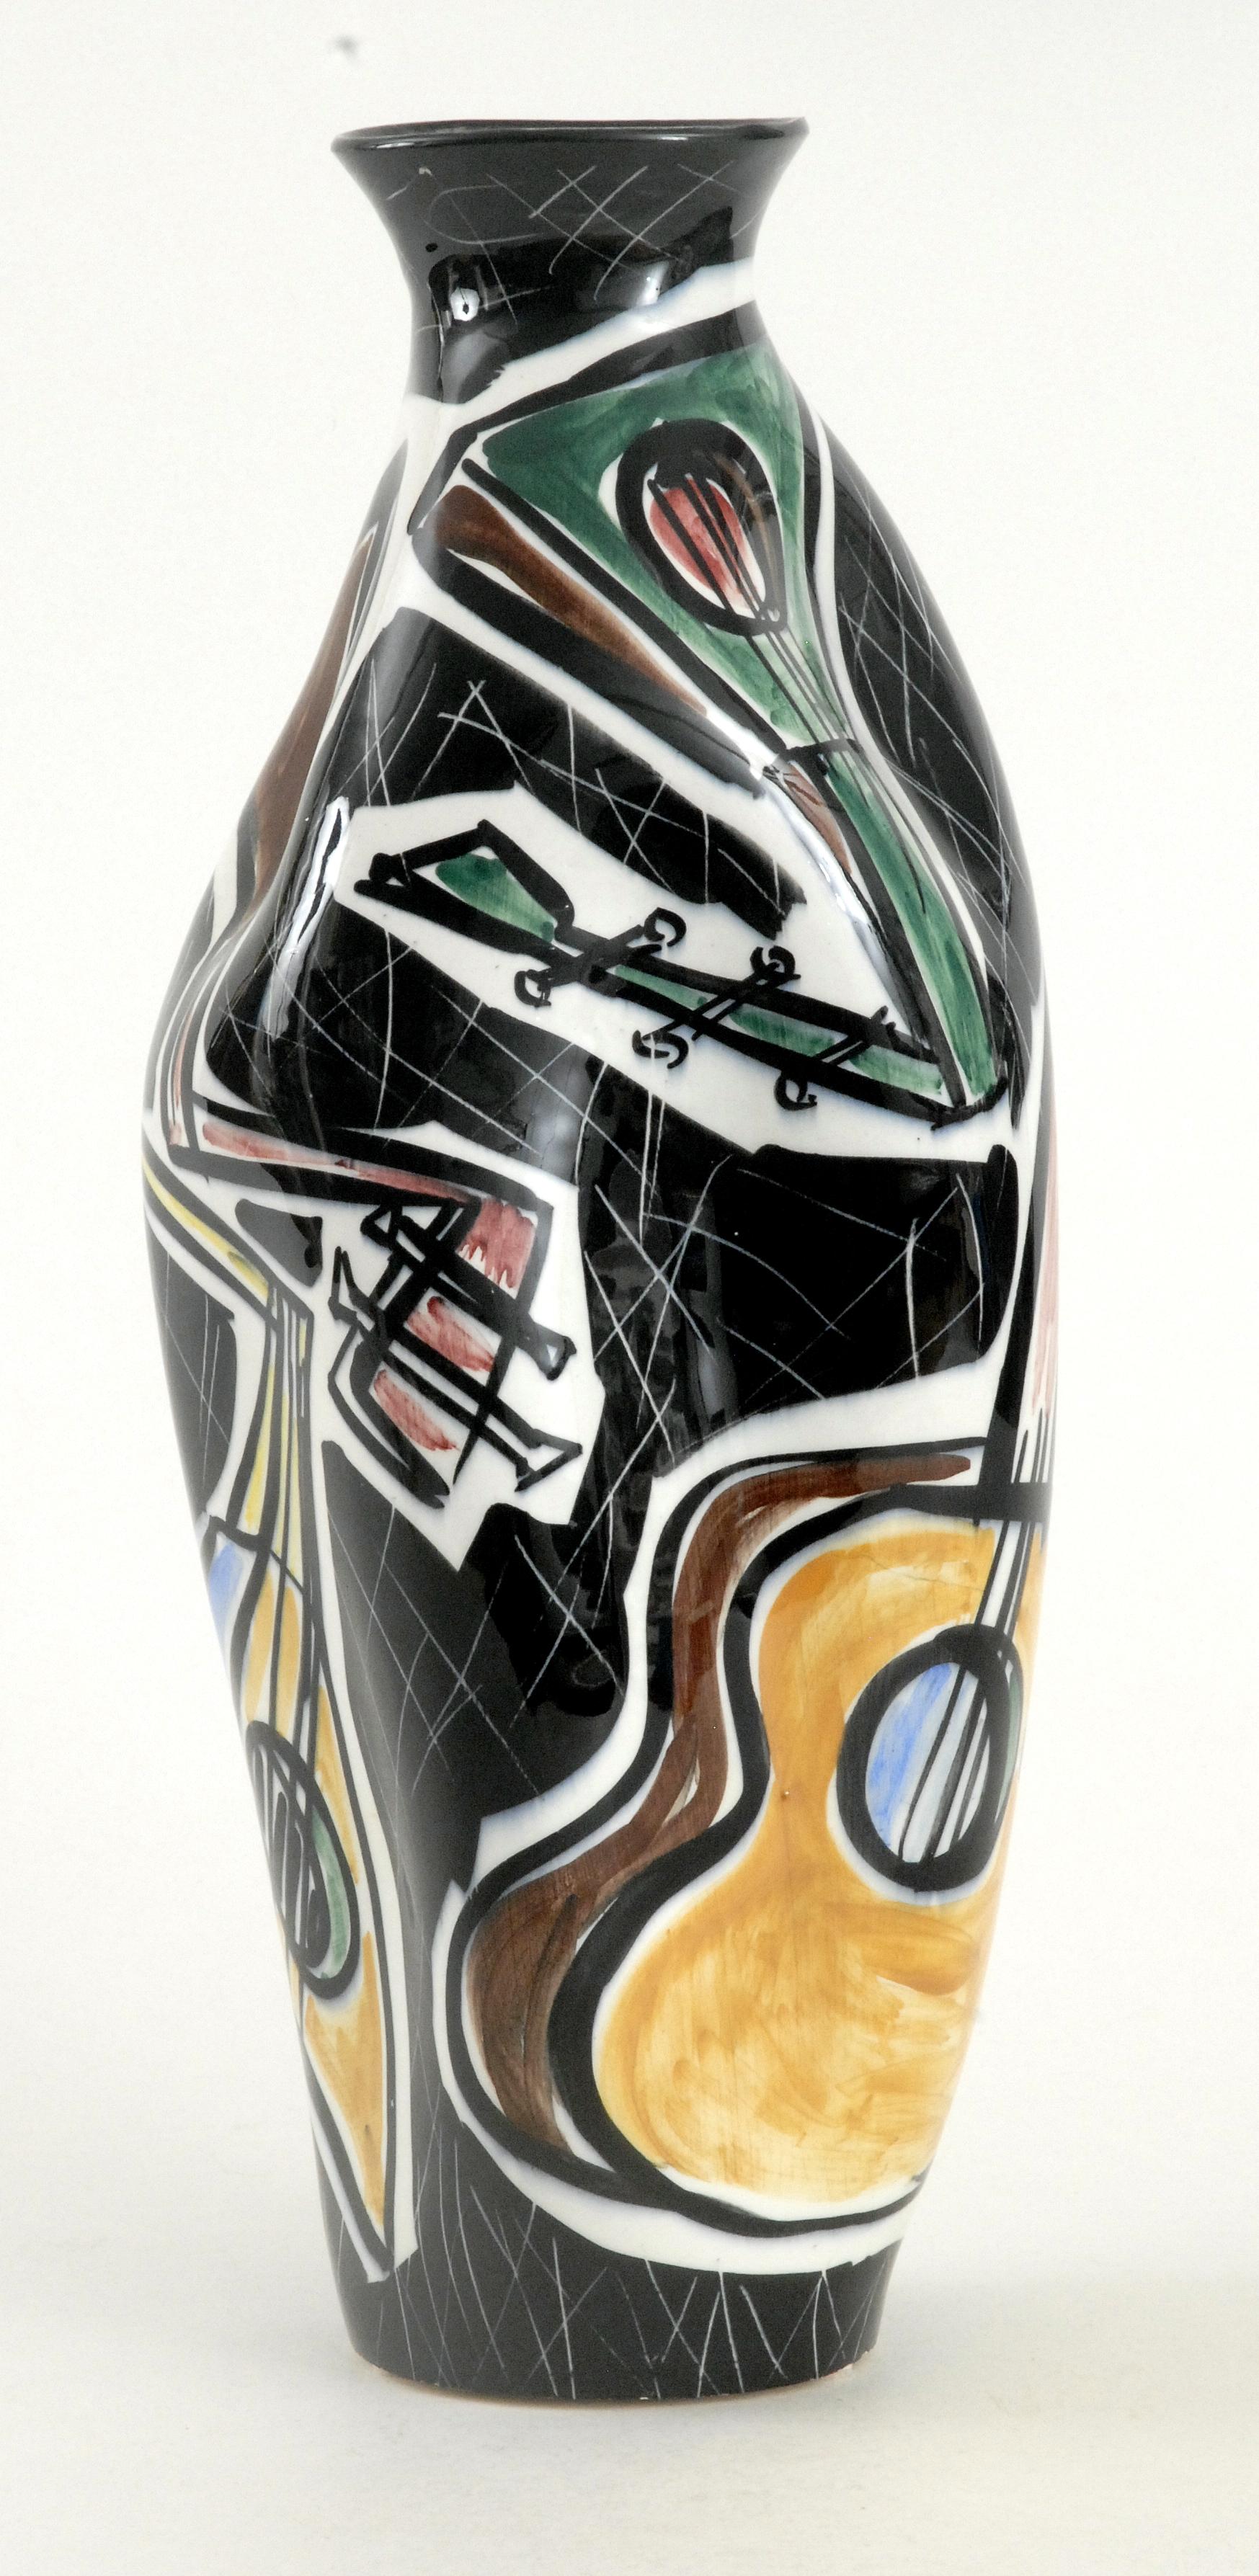 A large highly decorated vase with pushed in sides painted with guitars in various colors and shapes in white cartouches on an overall black background. Stylistically influenced by the Cubist Movement painters, Picasso and Braque et al.
Stamped